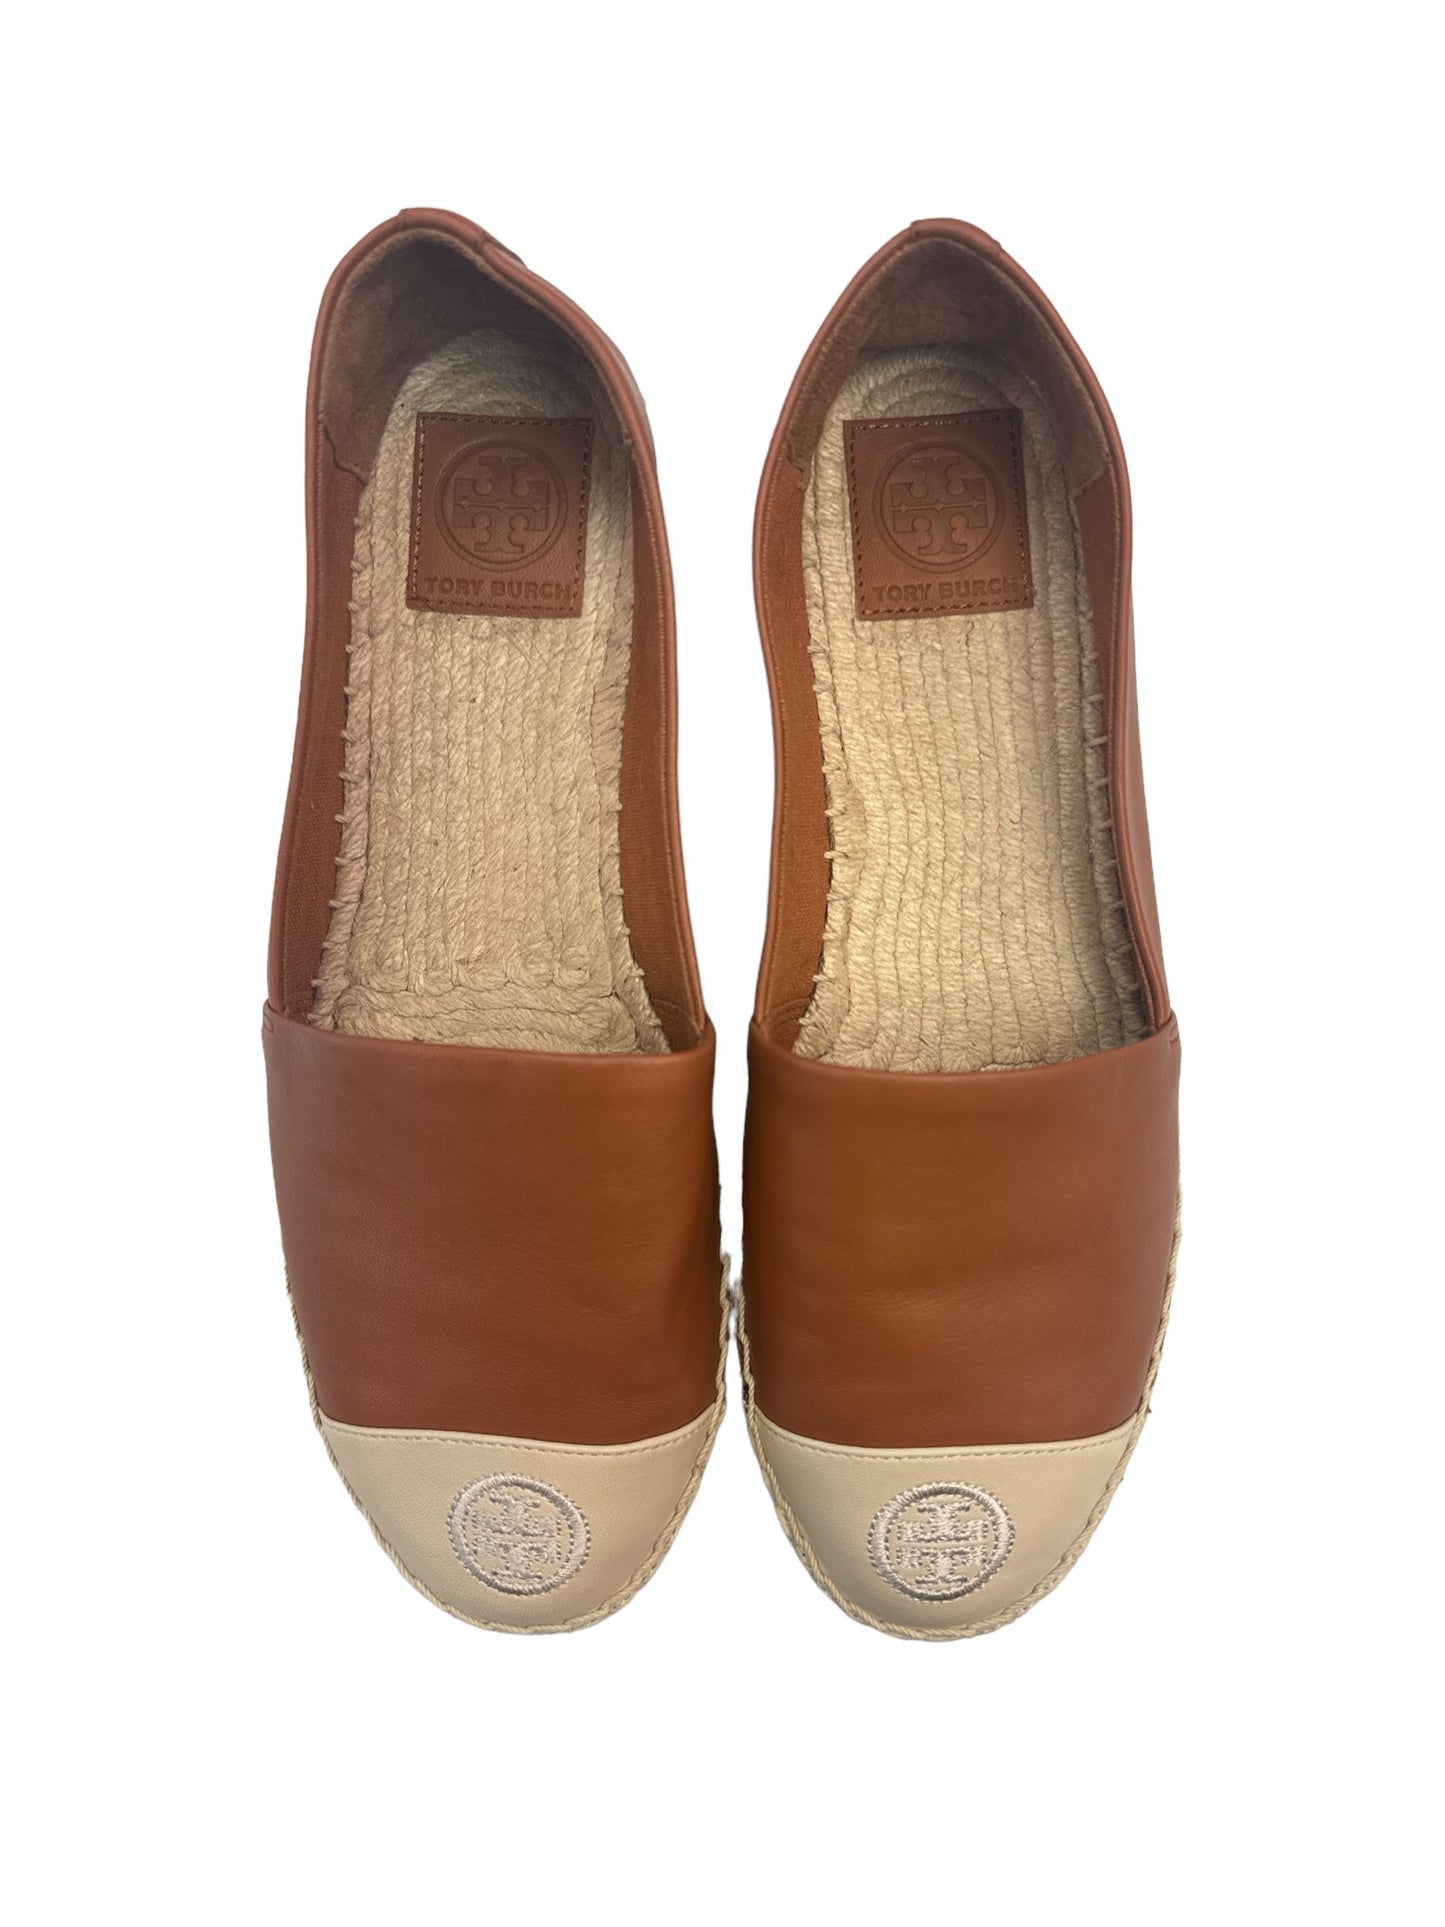 Shoes Designer By Tory Burch  Size: 7.5